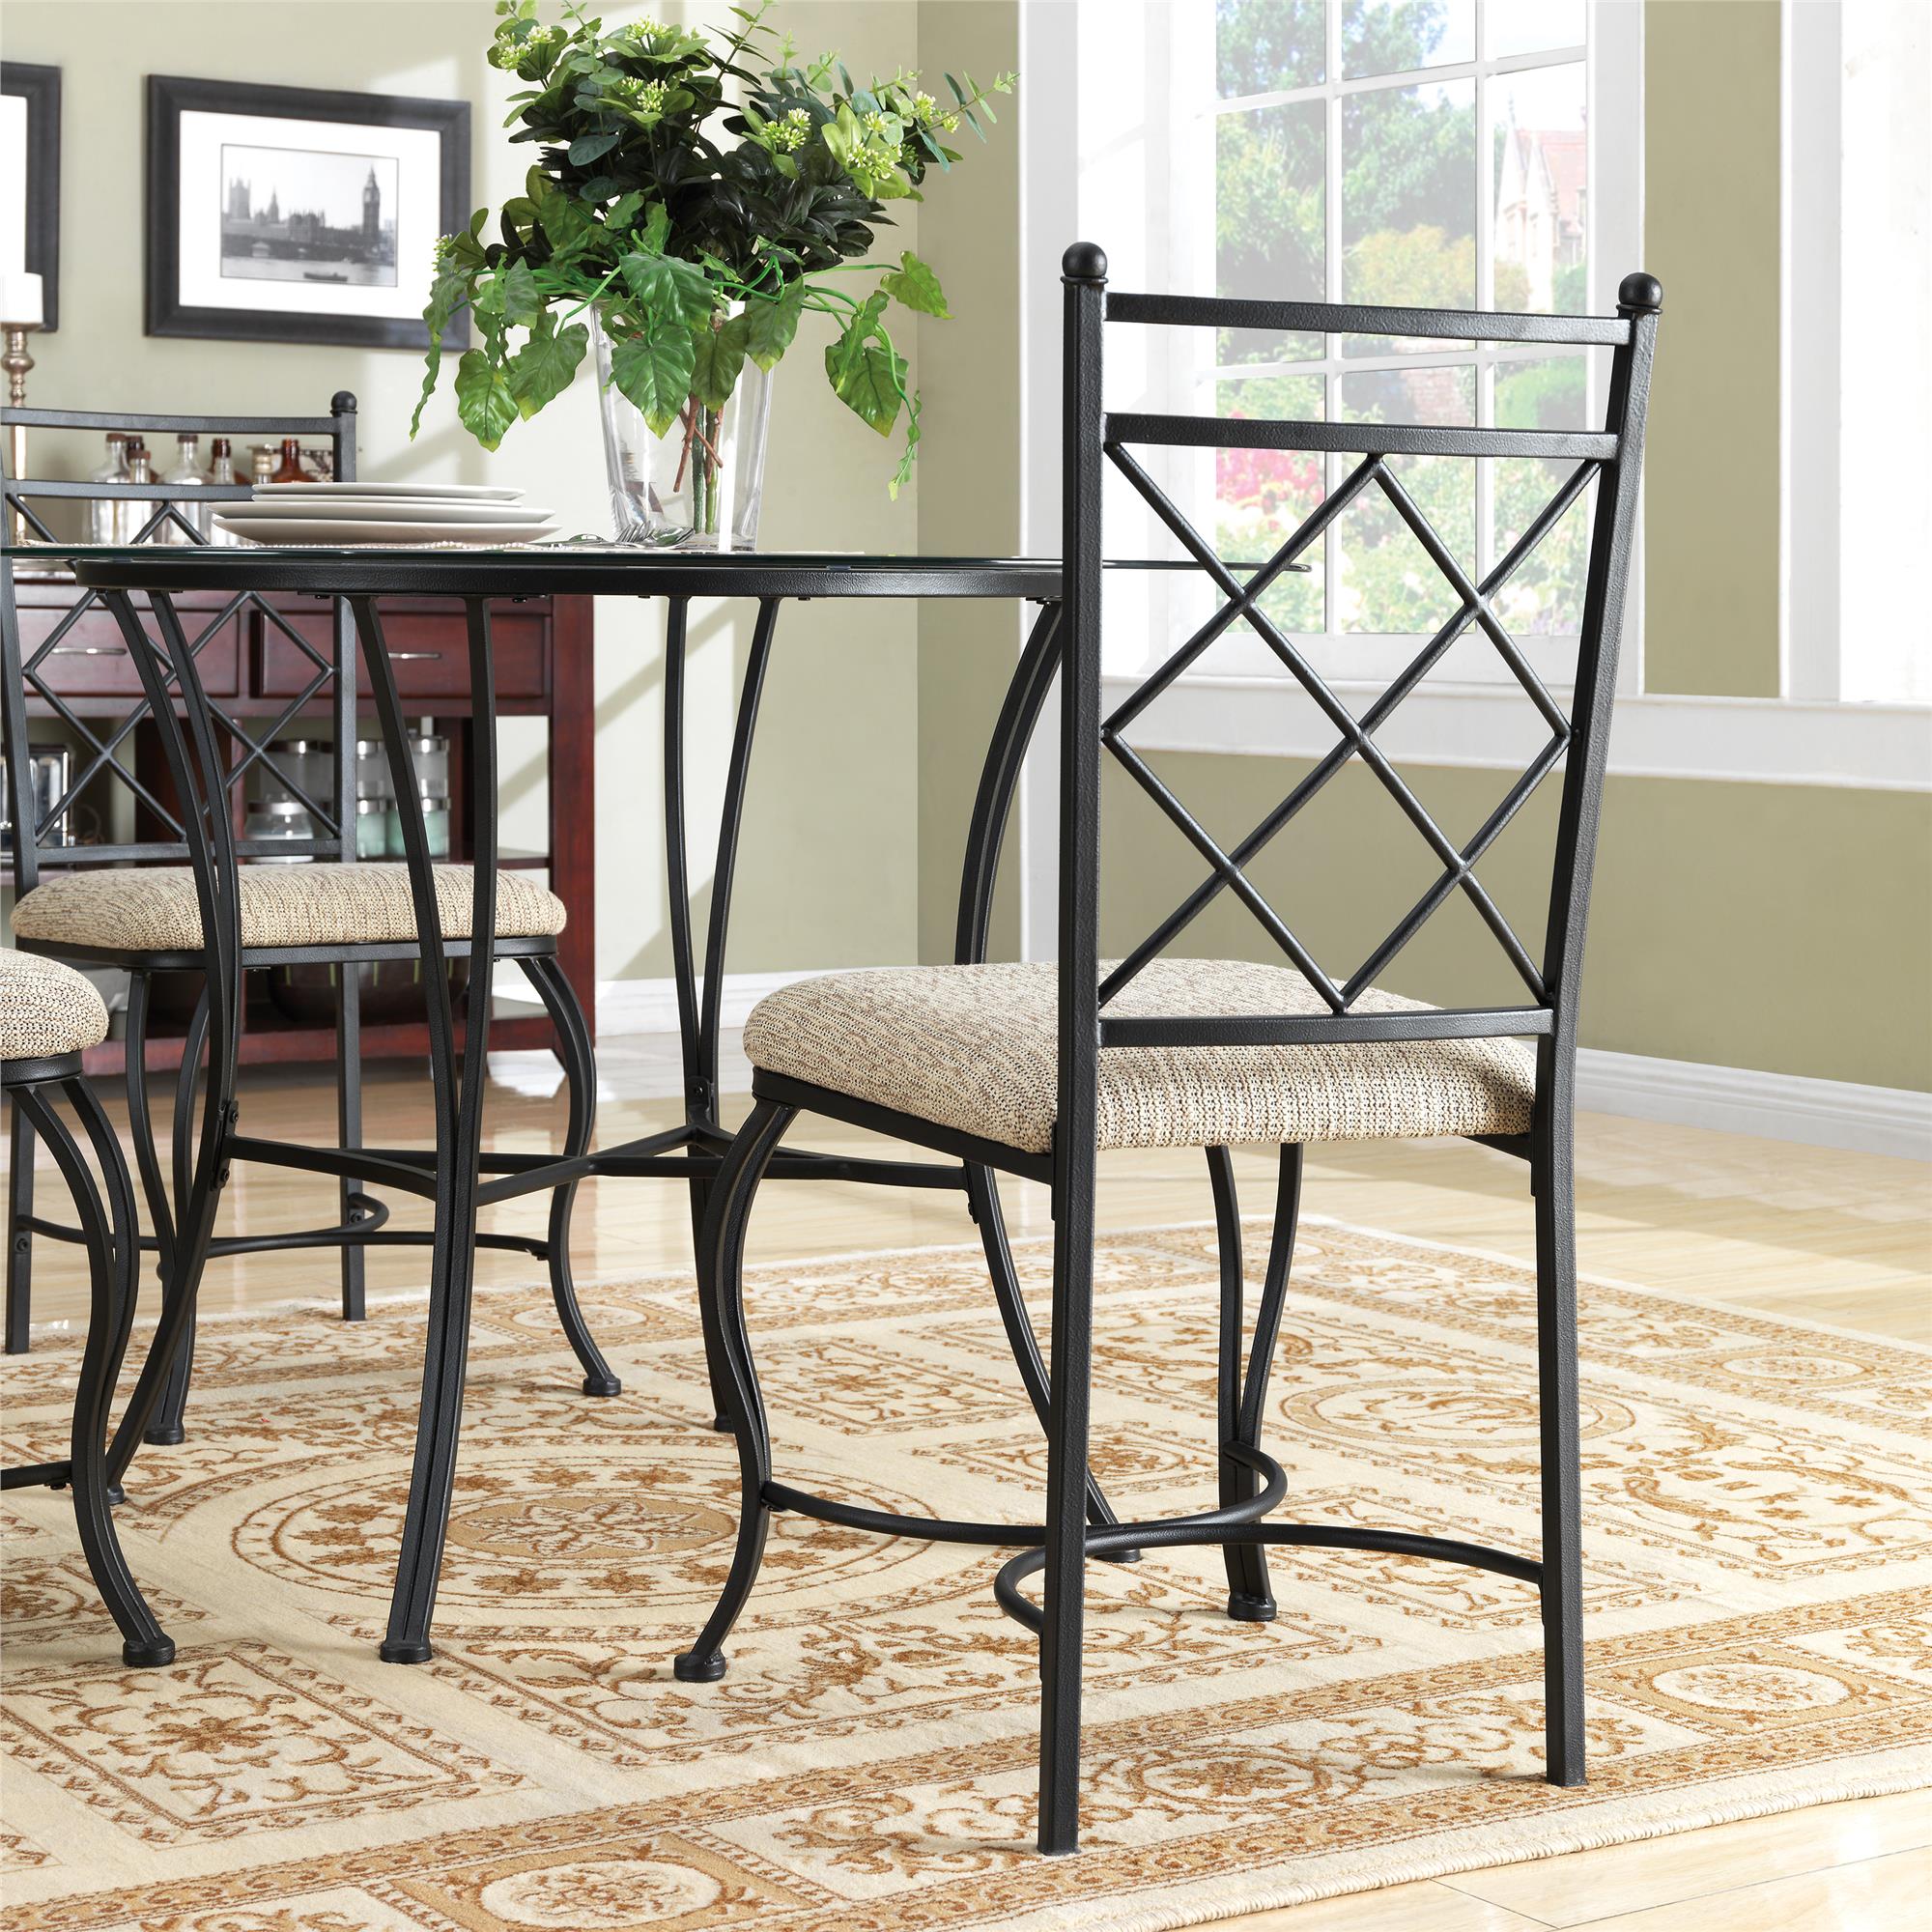 DHP Traditional 5-Piece Metal Dining Set, Glass Top Round Table and 4 Upholstered Seat Chairs - image 3 of 12